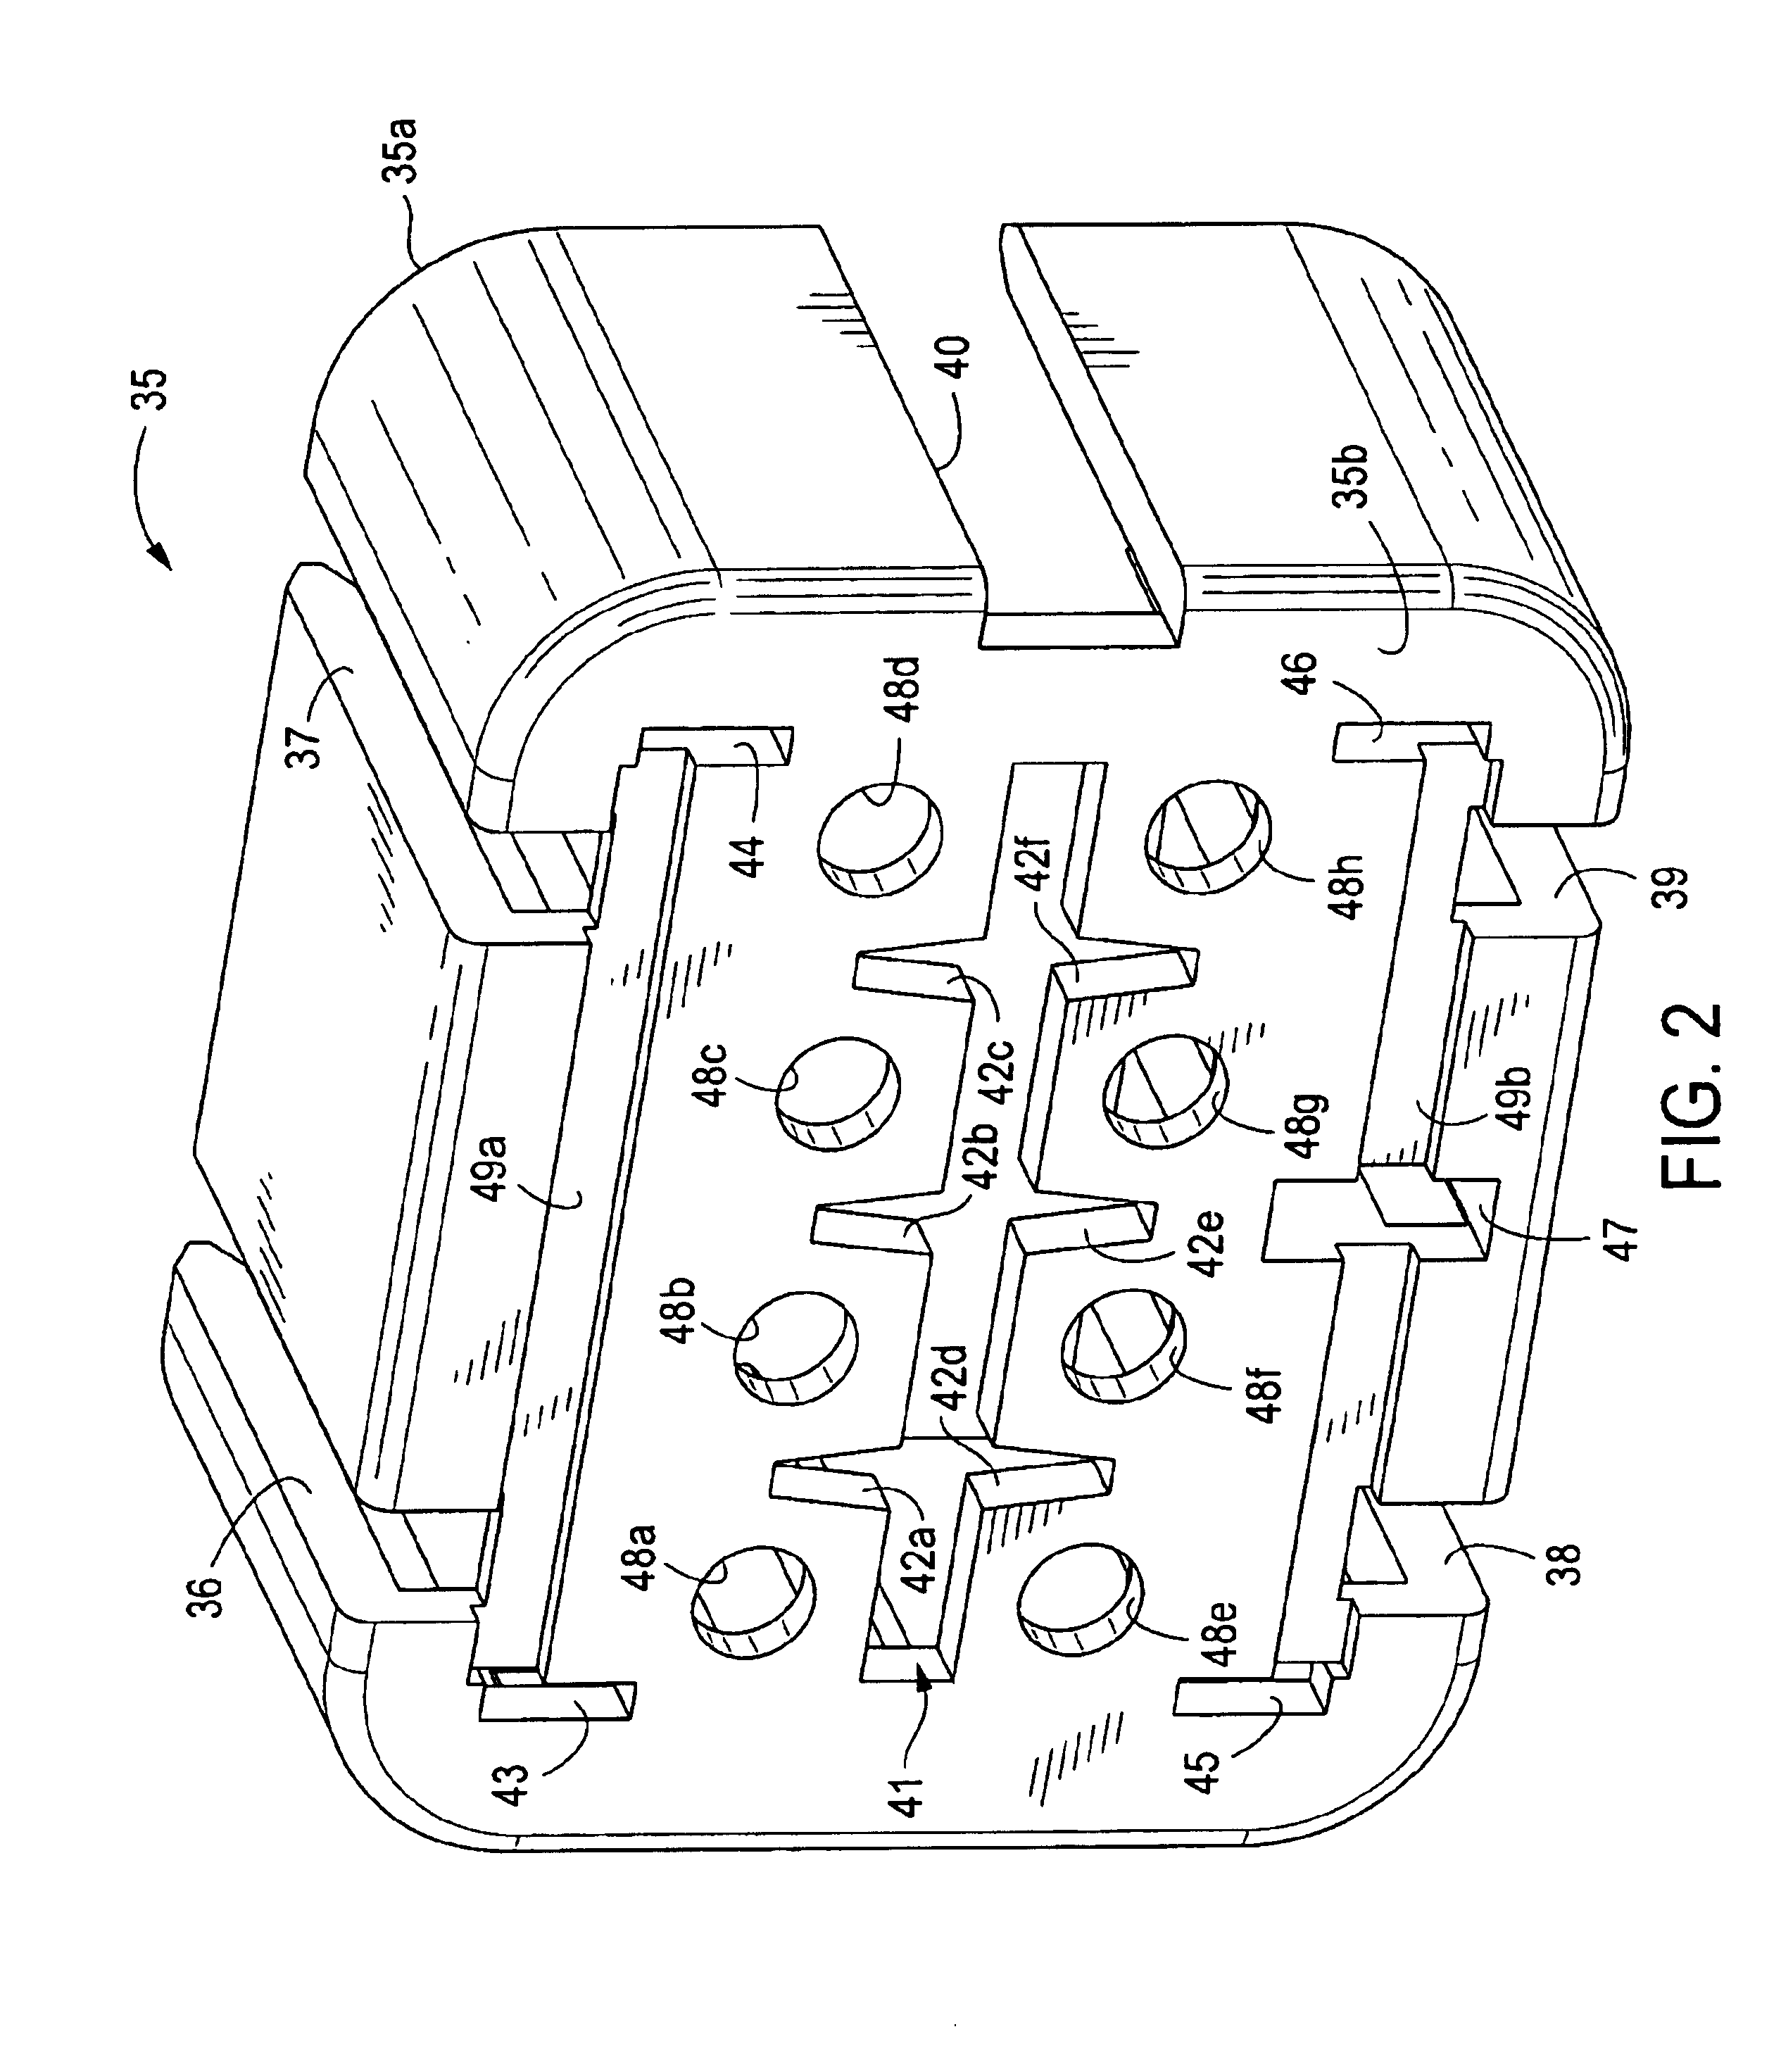 Electrical connector apparatus, methods and articles of manufacture